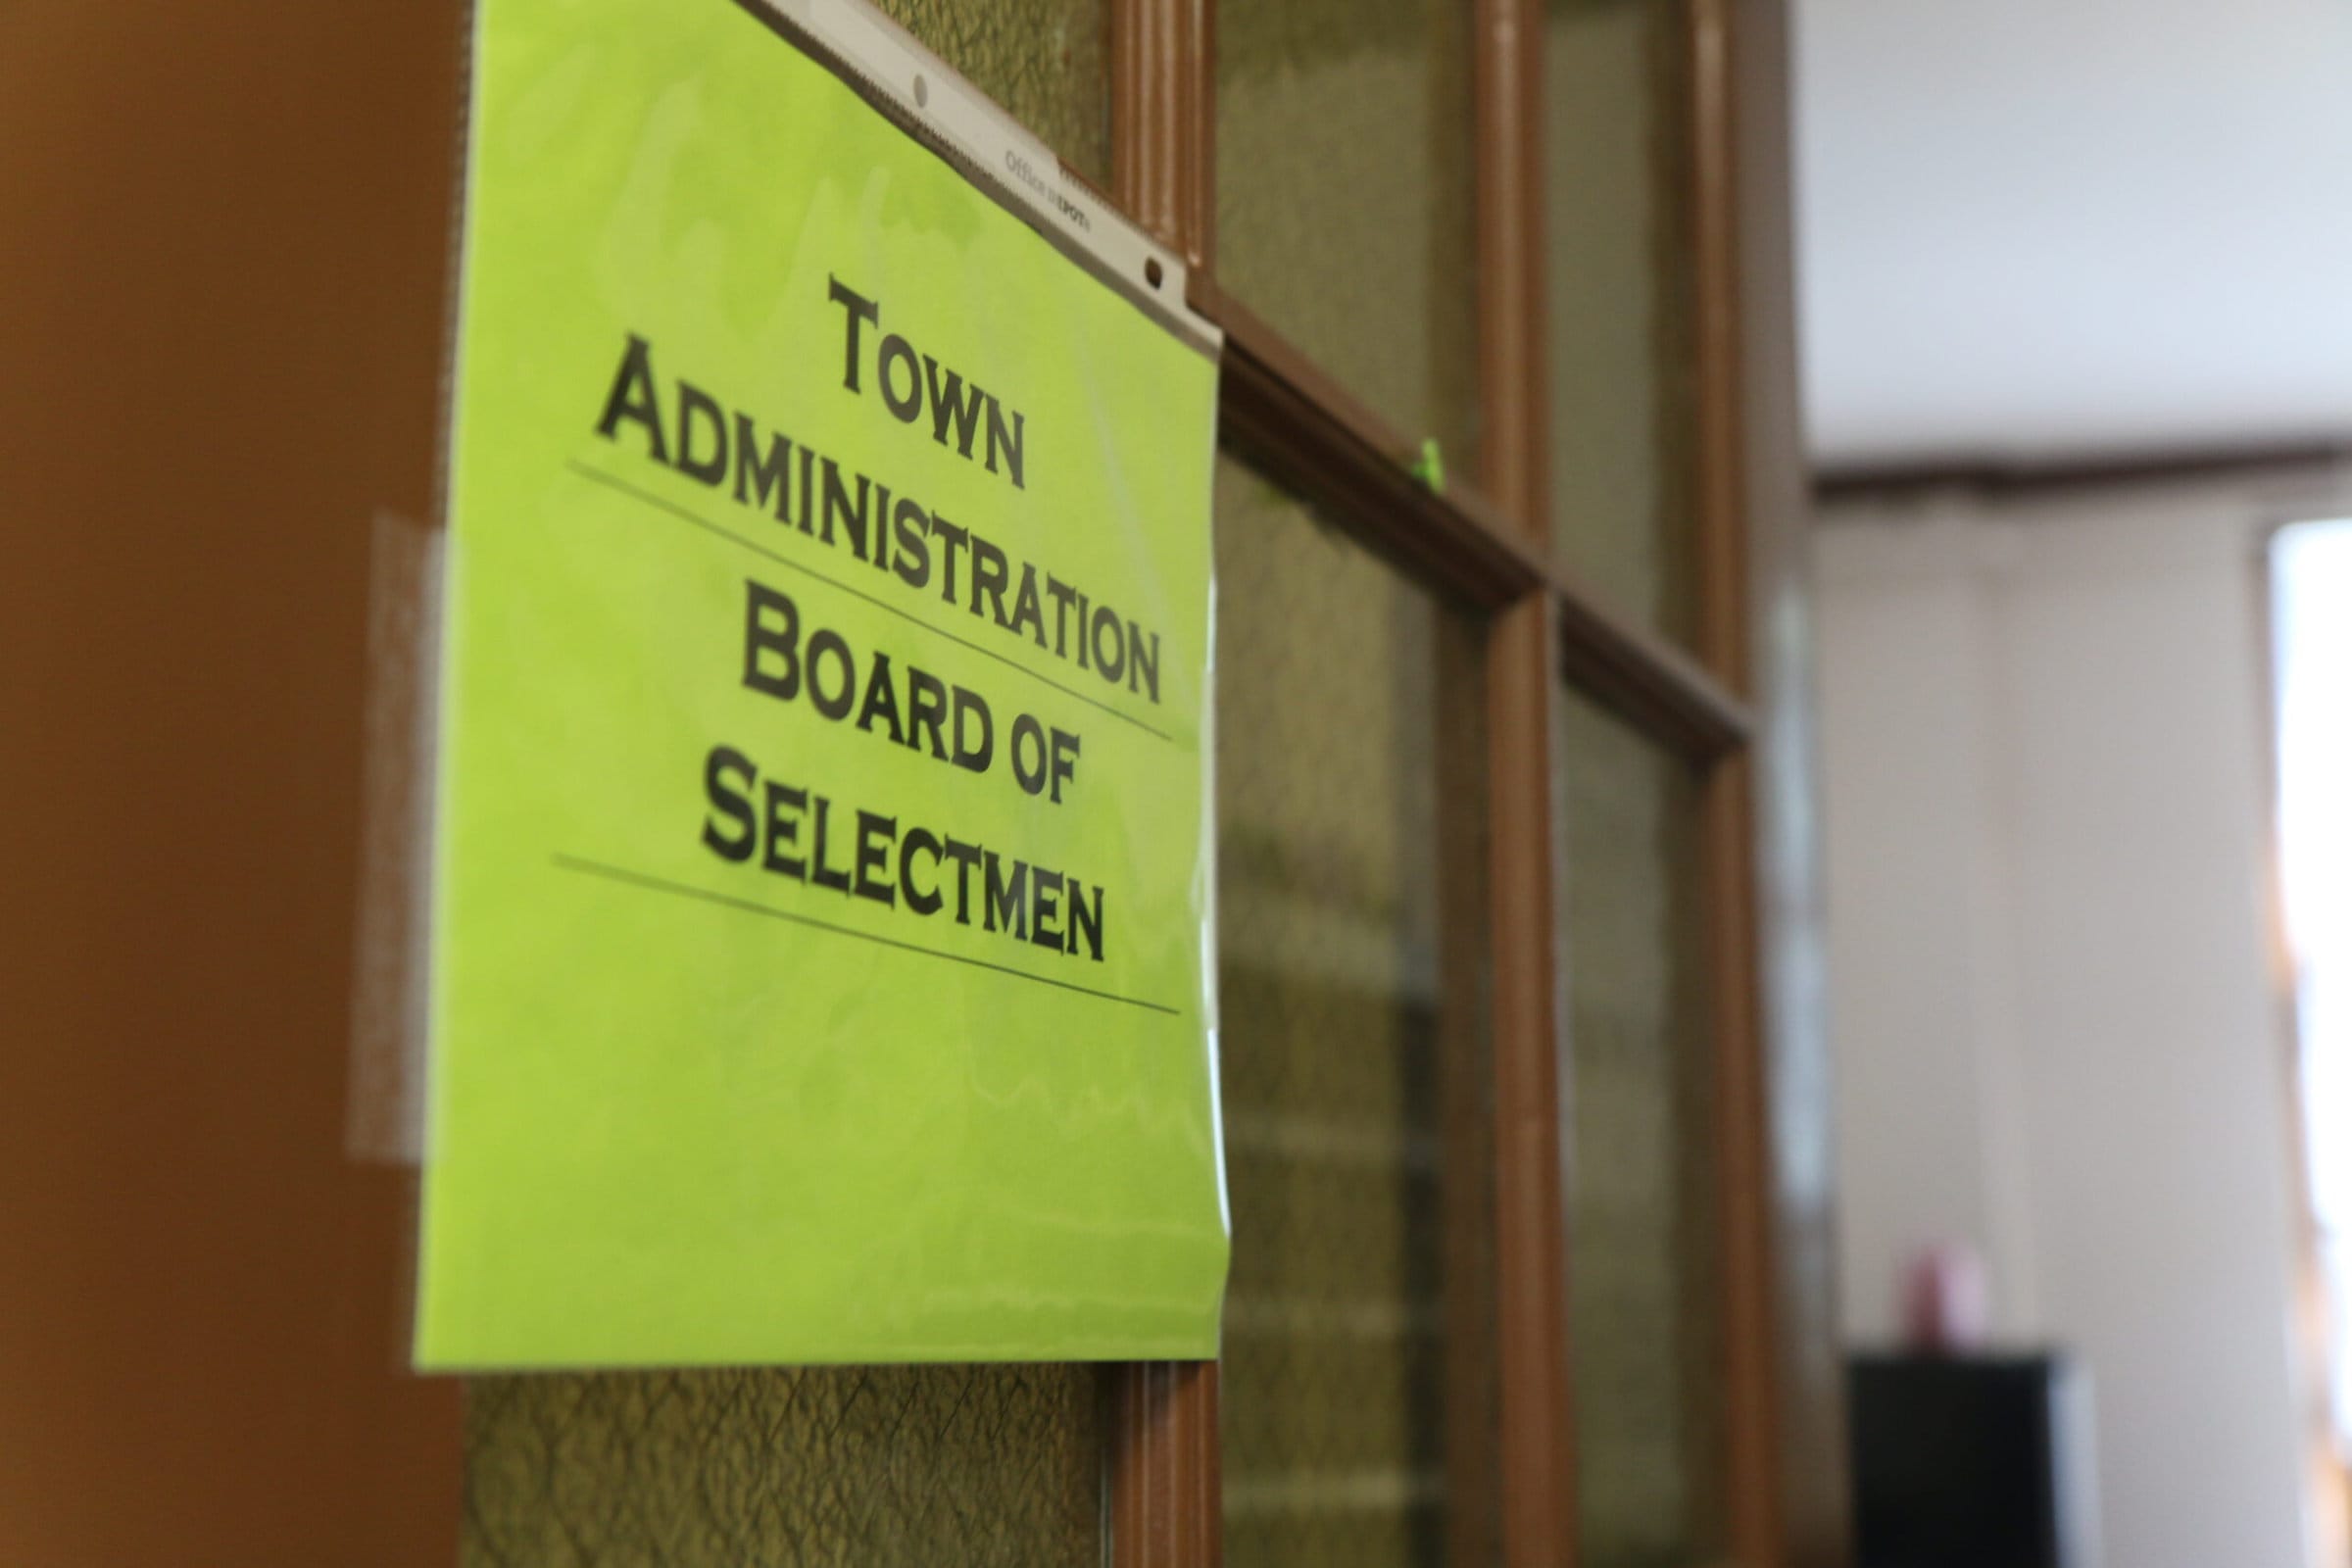 Northborough receives 27 candidates for town administrator